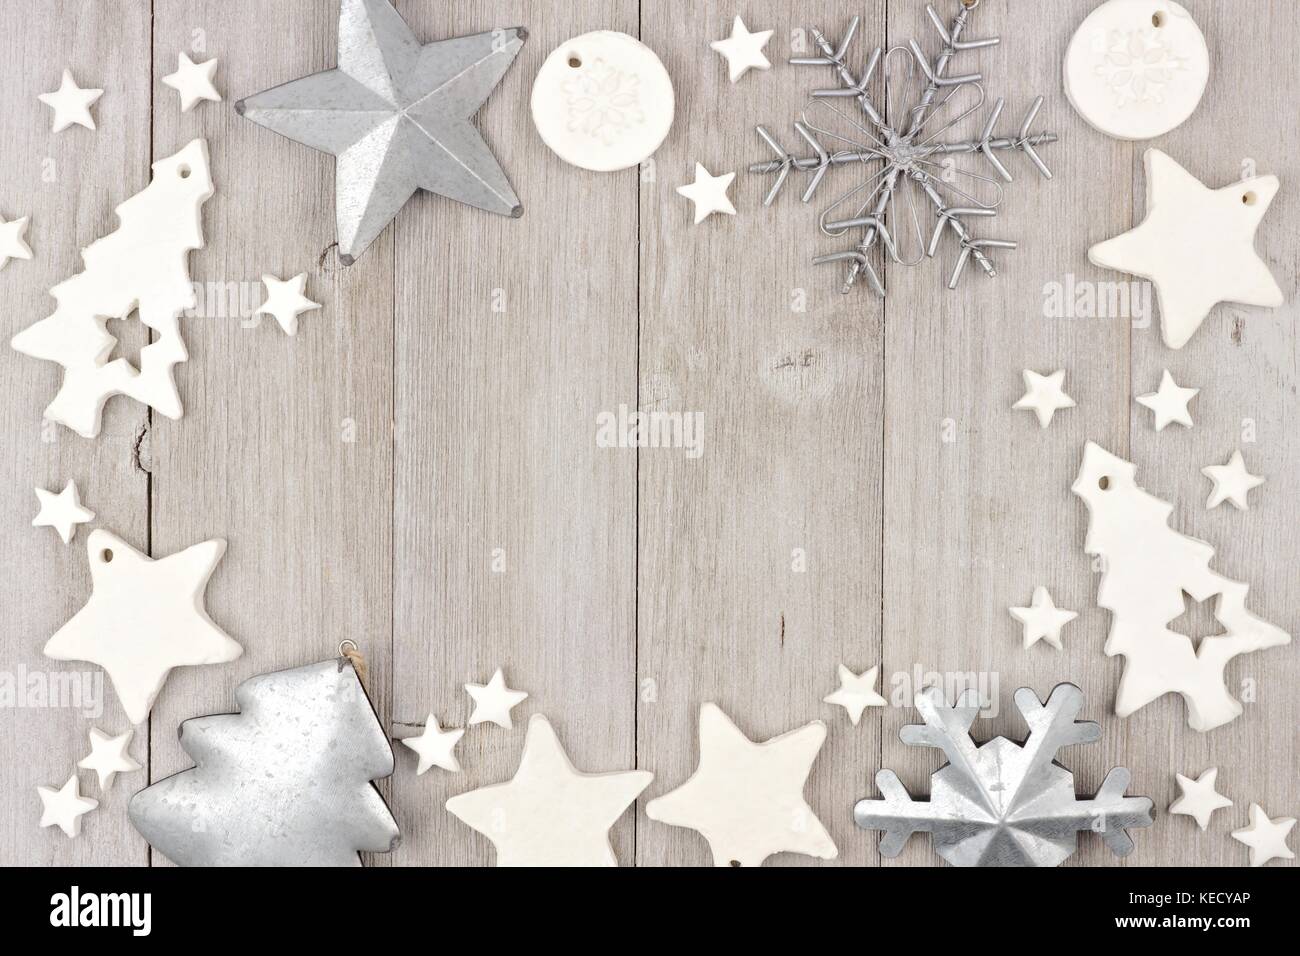 Christmas frame with shabby chic handmade clay and metal ornaments on a rustic wood background Stock Photo